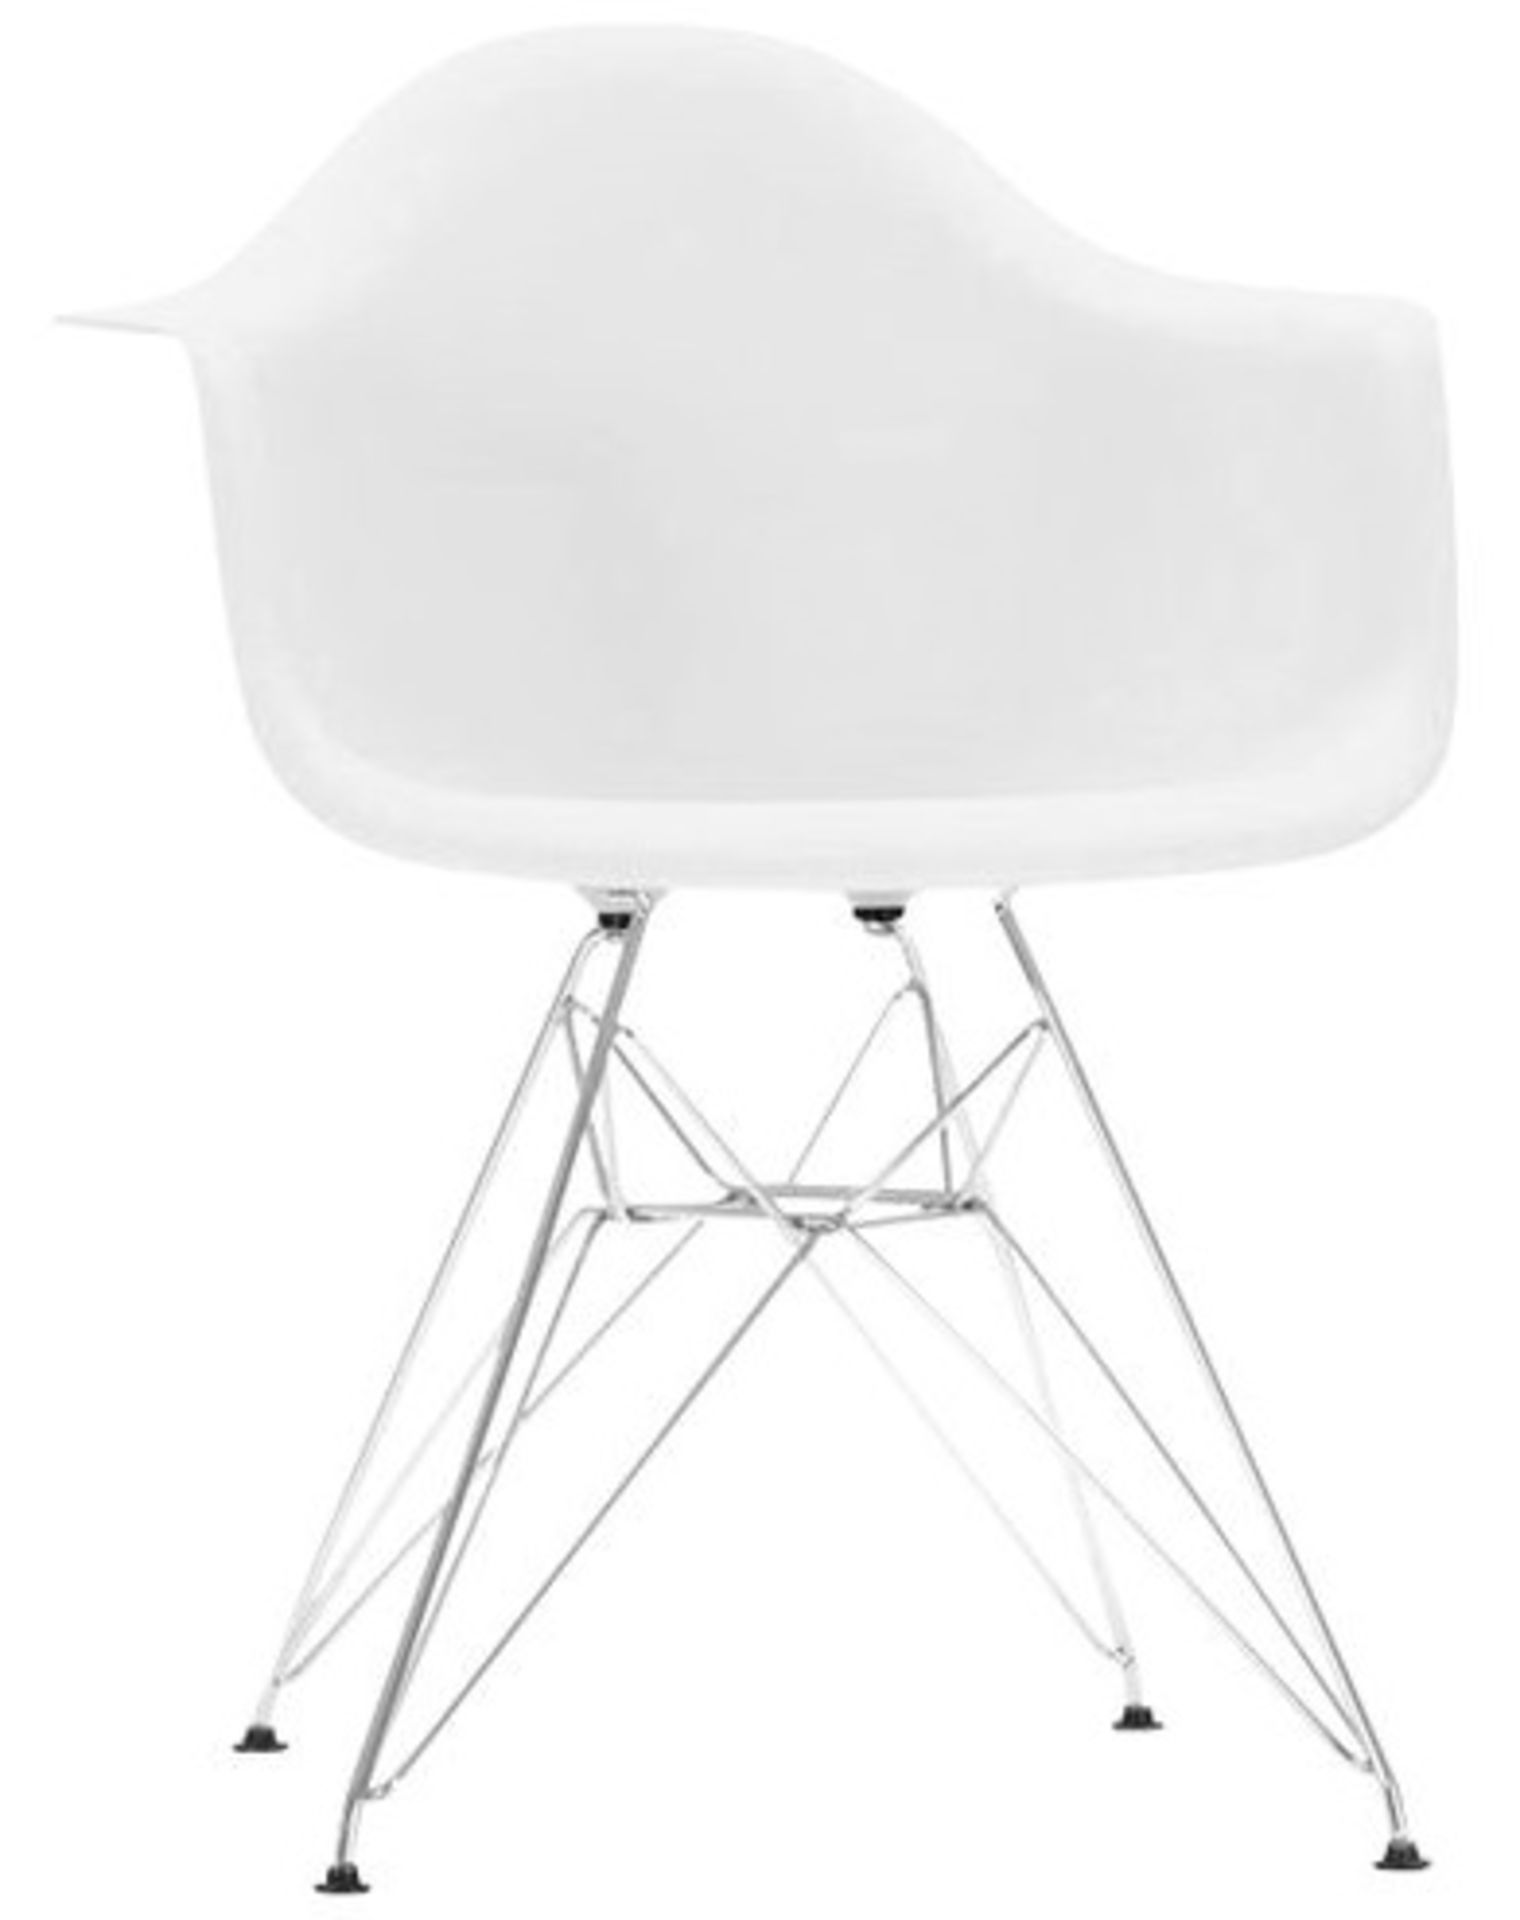 A Set Of 6 x Eames-Style Dining Chairs in White - Includes 2 x Carvers - Classic Design With Deep - Image 6 of 6